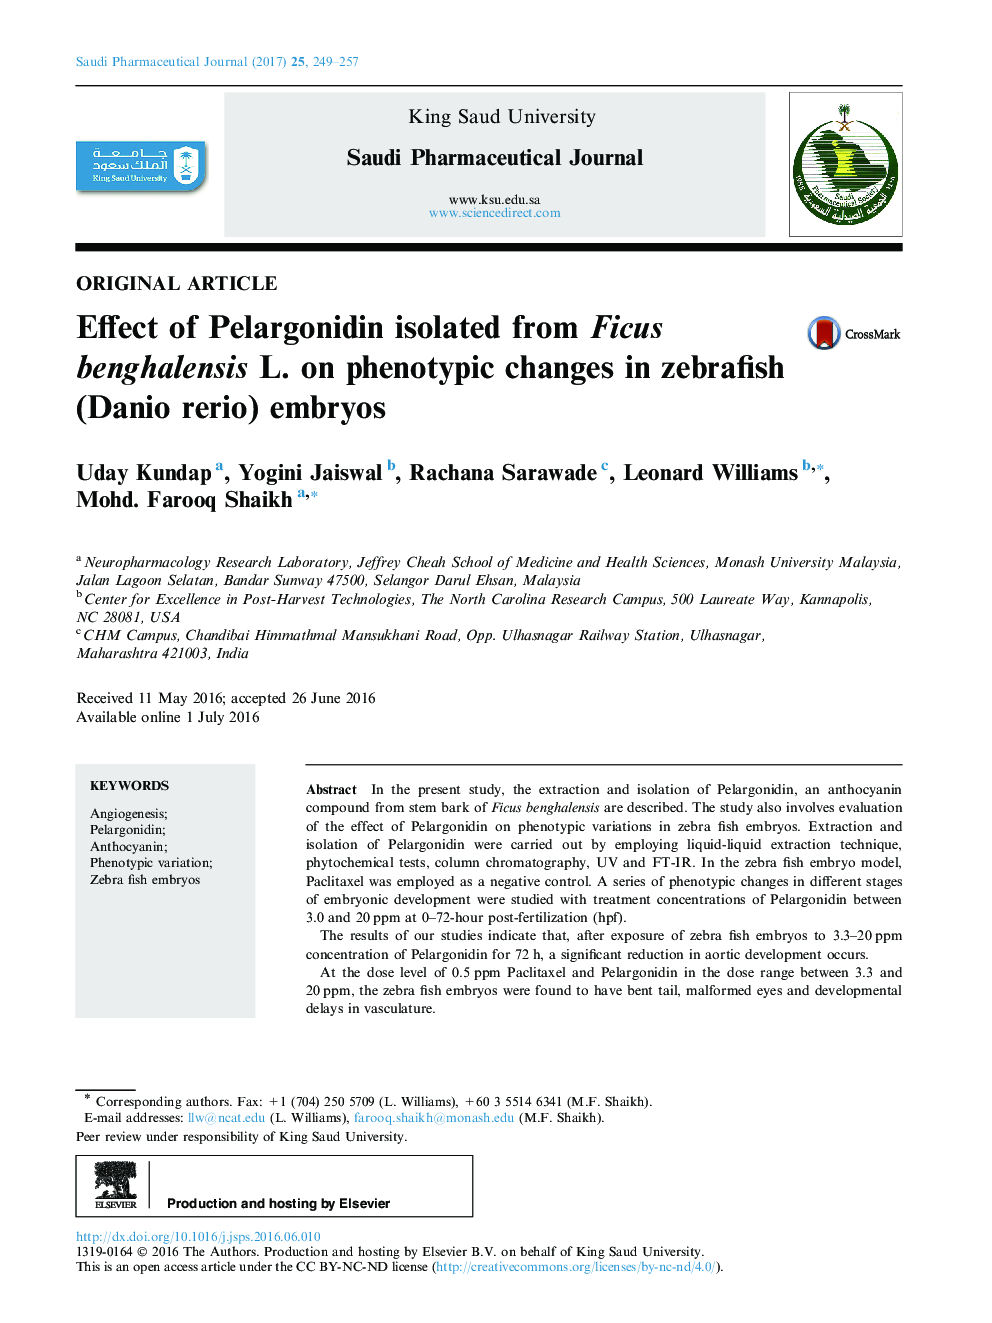 Effect of Pelargonidin isolated from Ficus benghalensis L. on phenotypic changes in zebrafish (Danio rerio) embryos